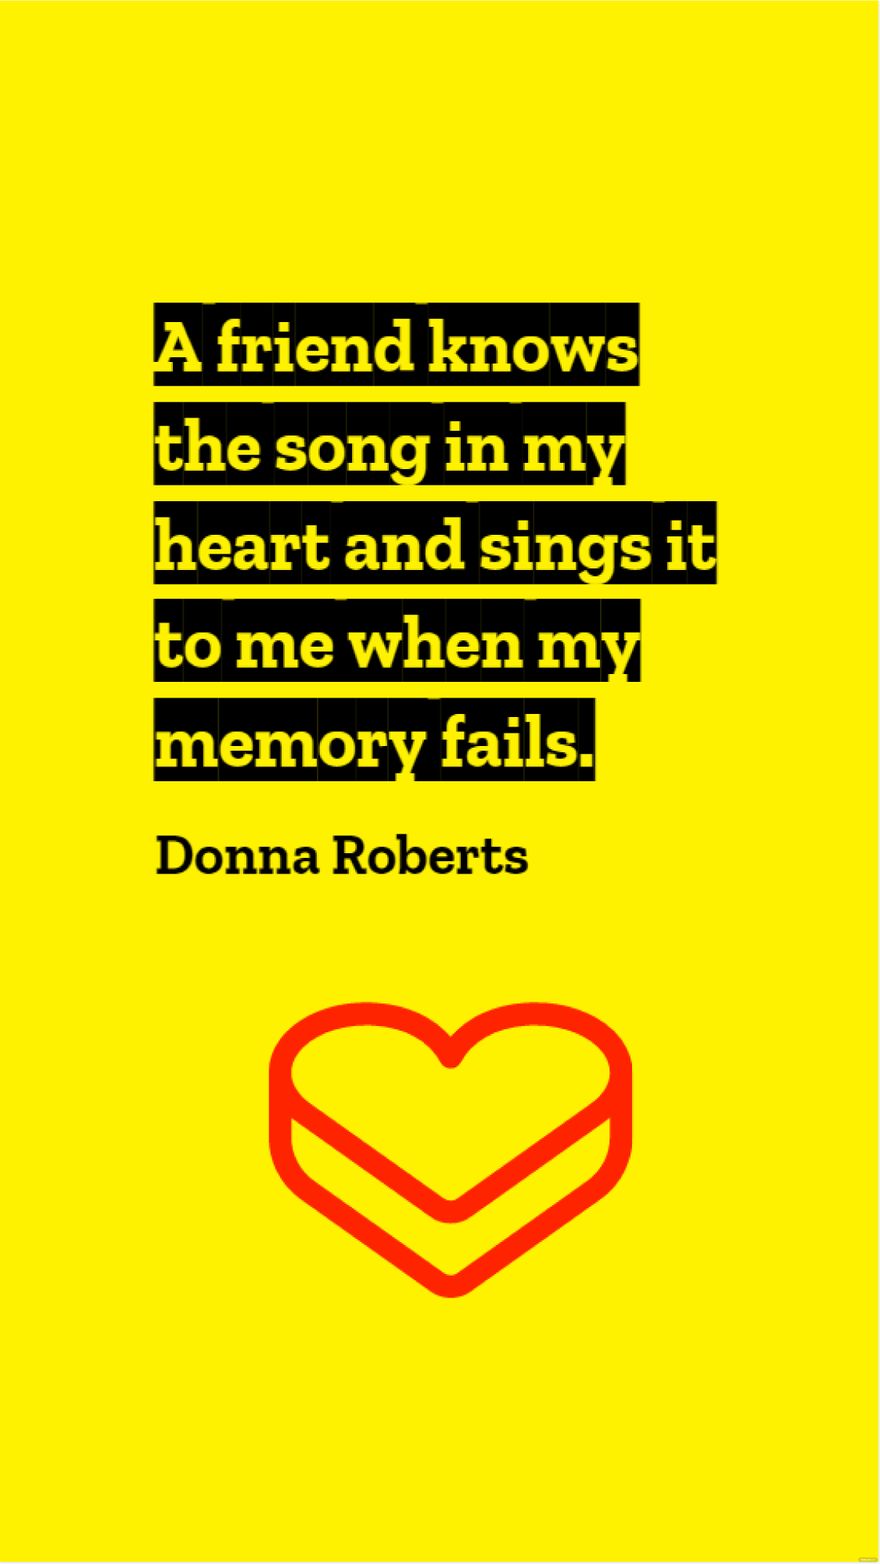 Donna Roberts - A friend knows the song in my heart and sings it to me when my memory fails. in JPG